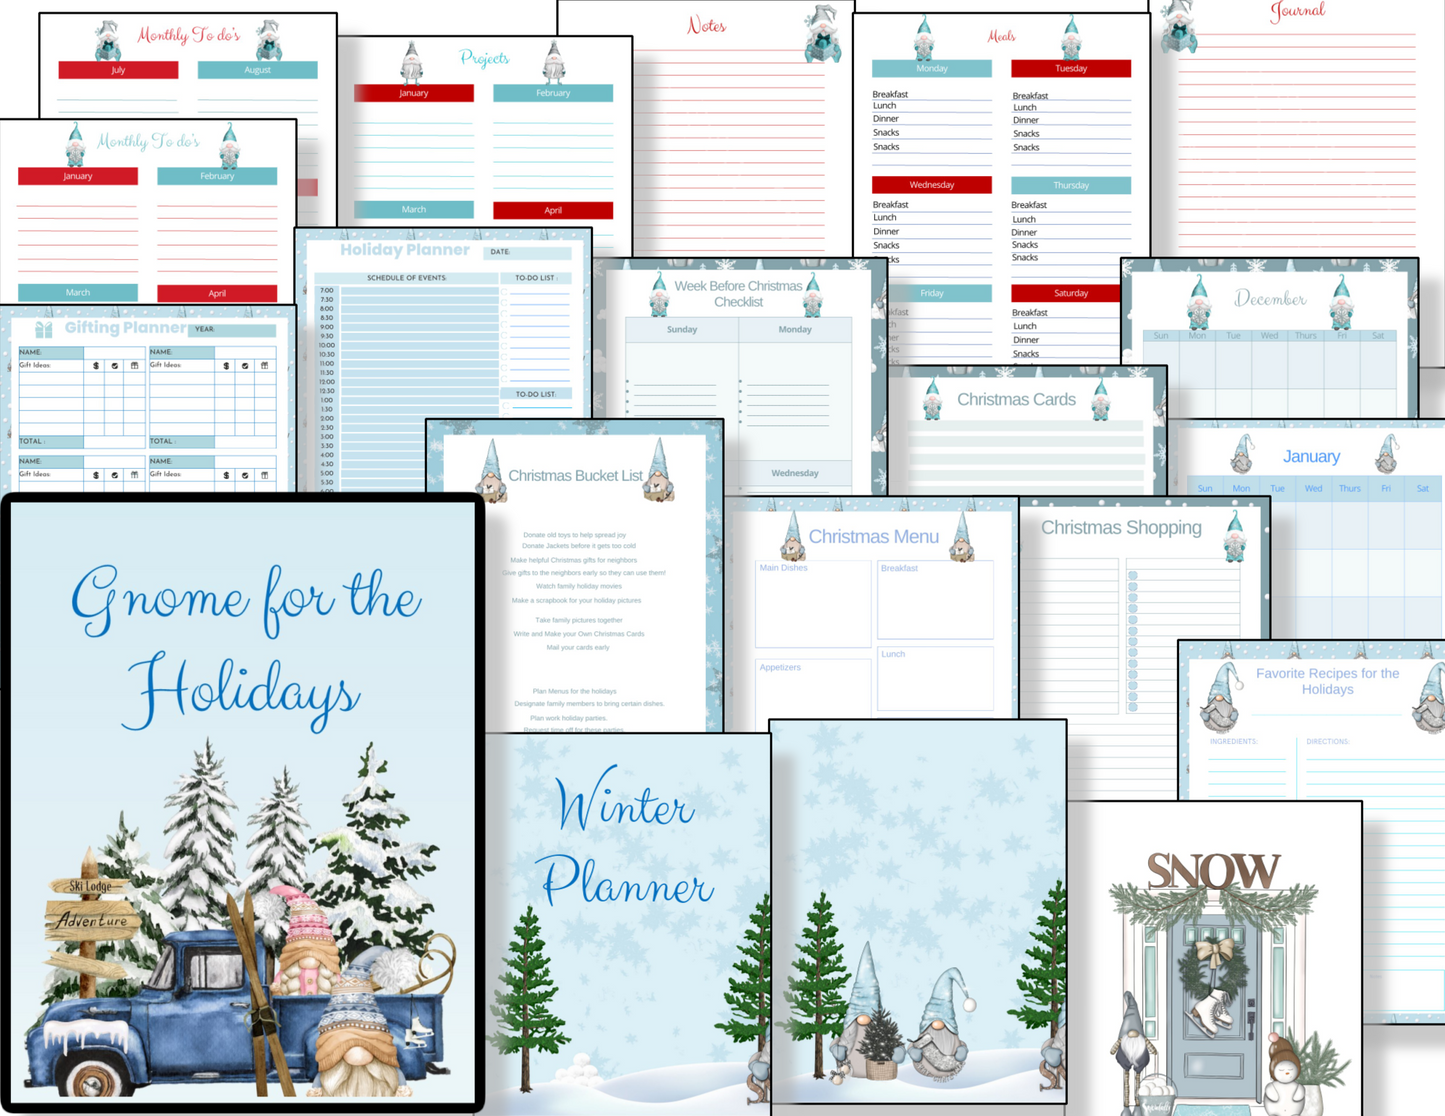 A Winter Gnome Themed Planner from Organized 31 Shop, featuring pictures of a truck and a snowman, is perfect for Christmas planning.